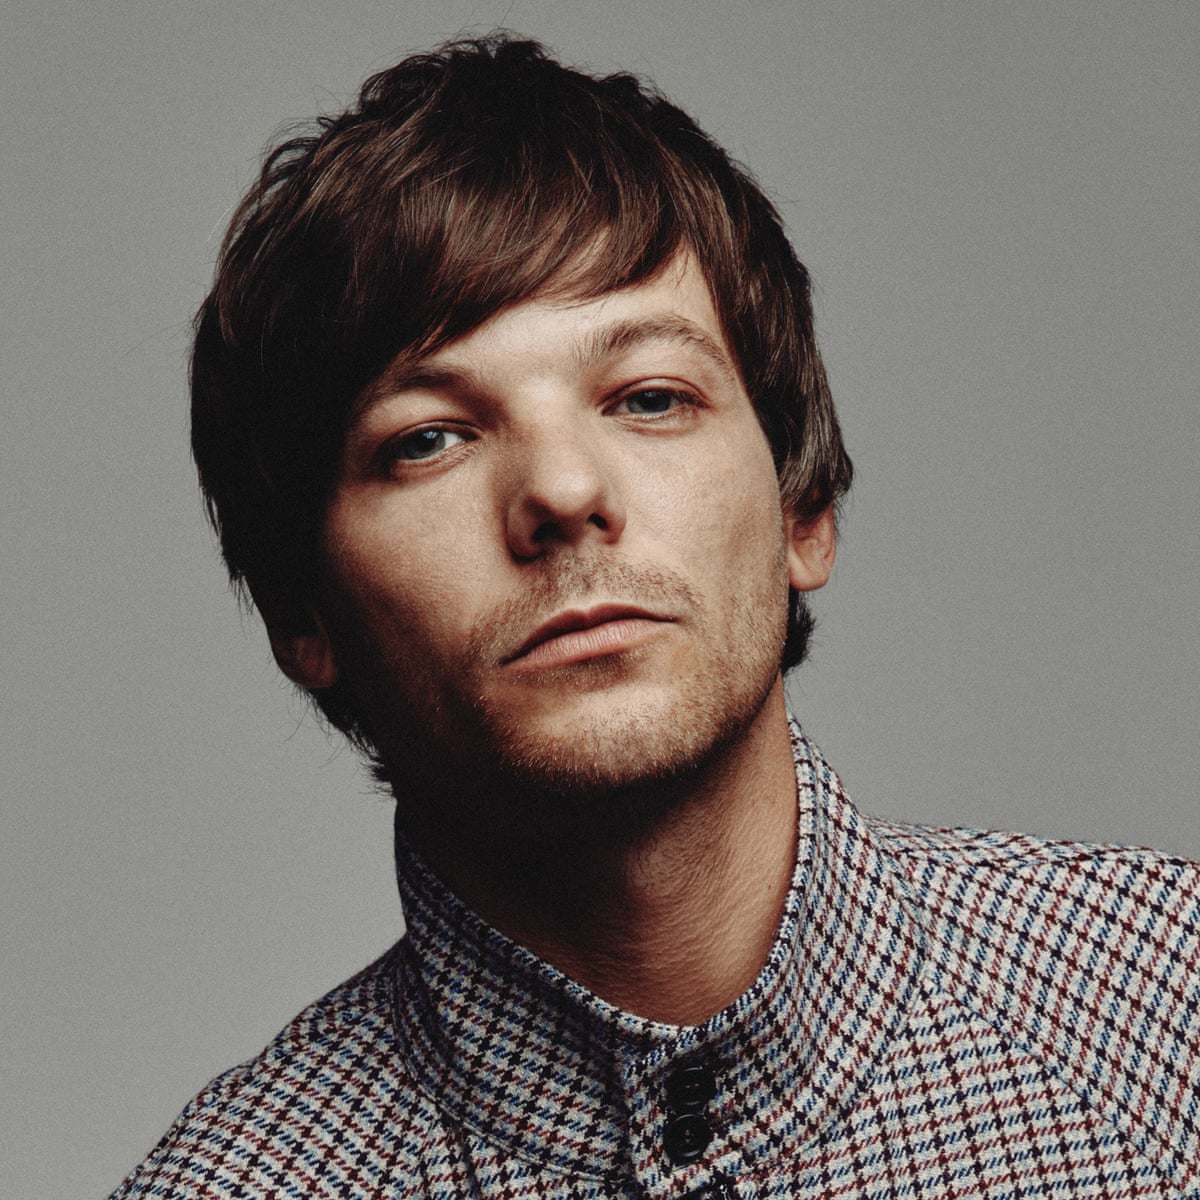 Louis Tomlinson On Loss And Love: 'The Dark Side I'Ve Been Through Gives Me  Strength' | Louis Tomlinson | The Guardian